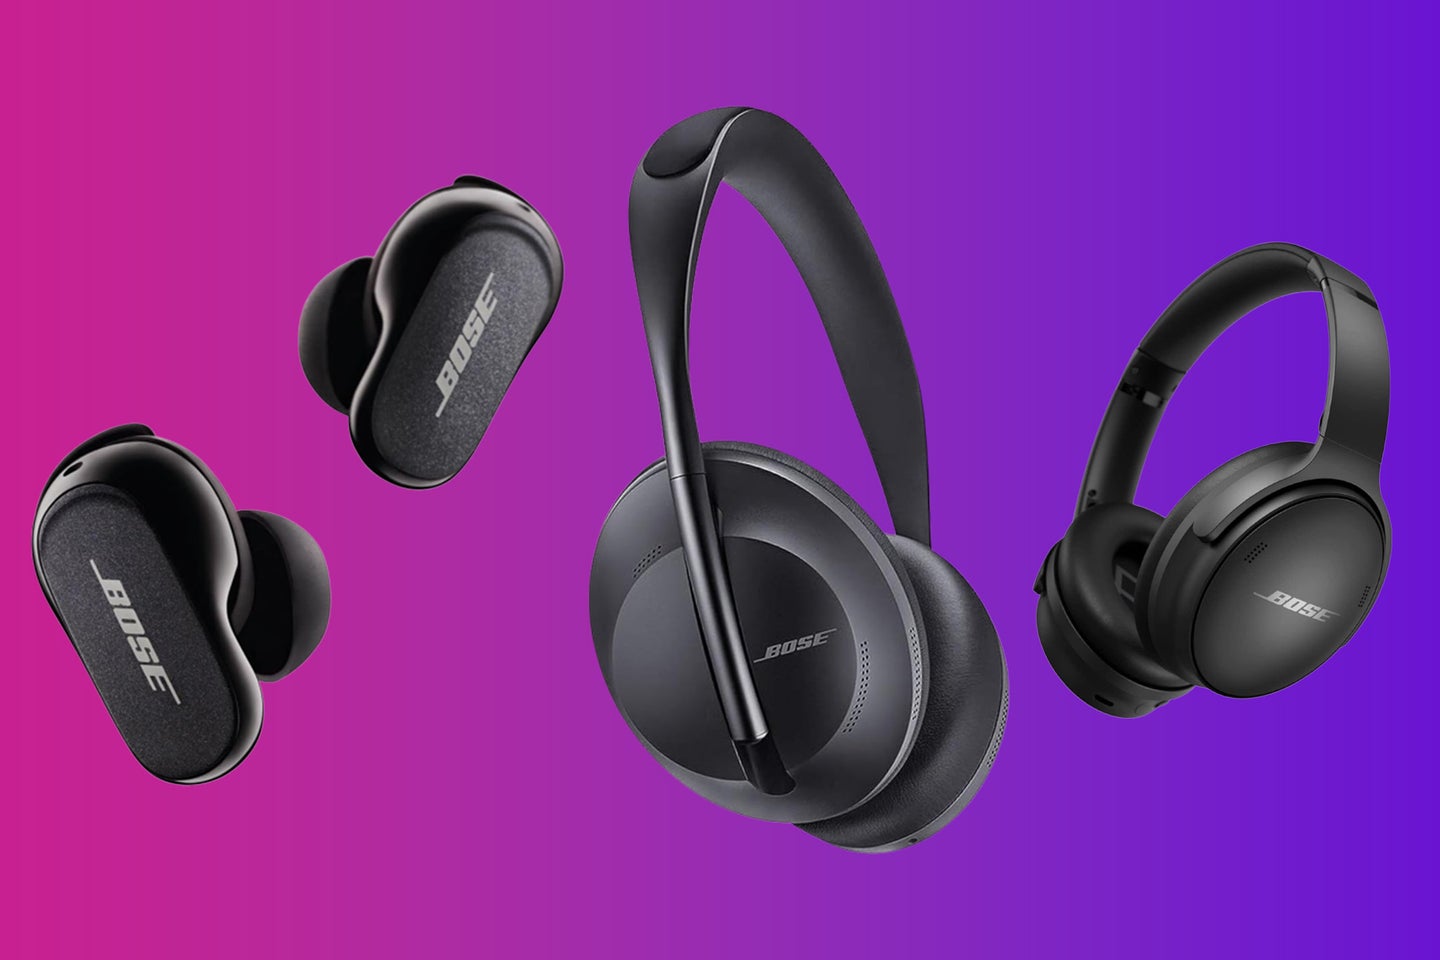 A lineup of bose headphones on sale